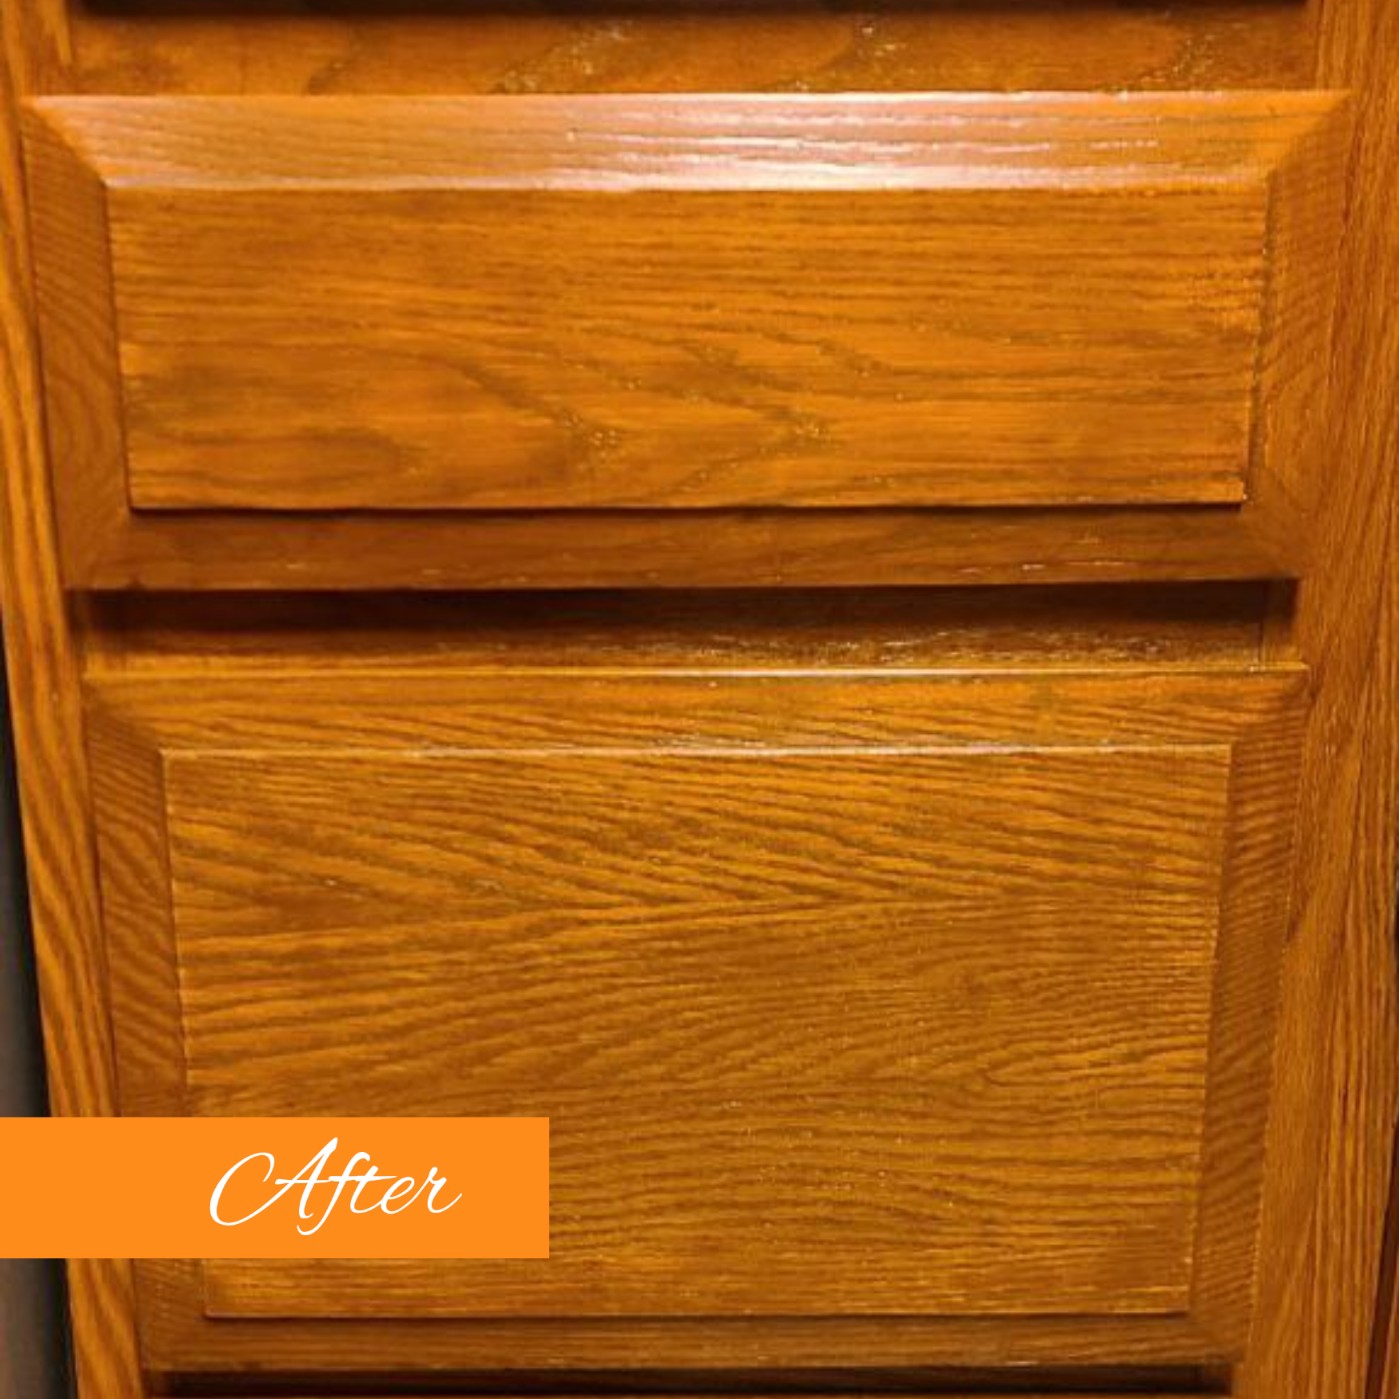 After-Classic Cabinet Renewal